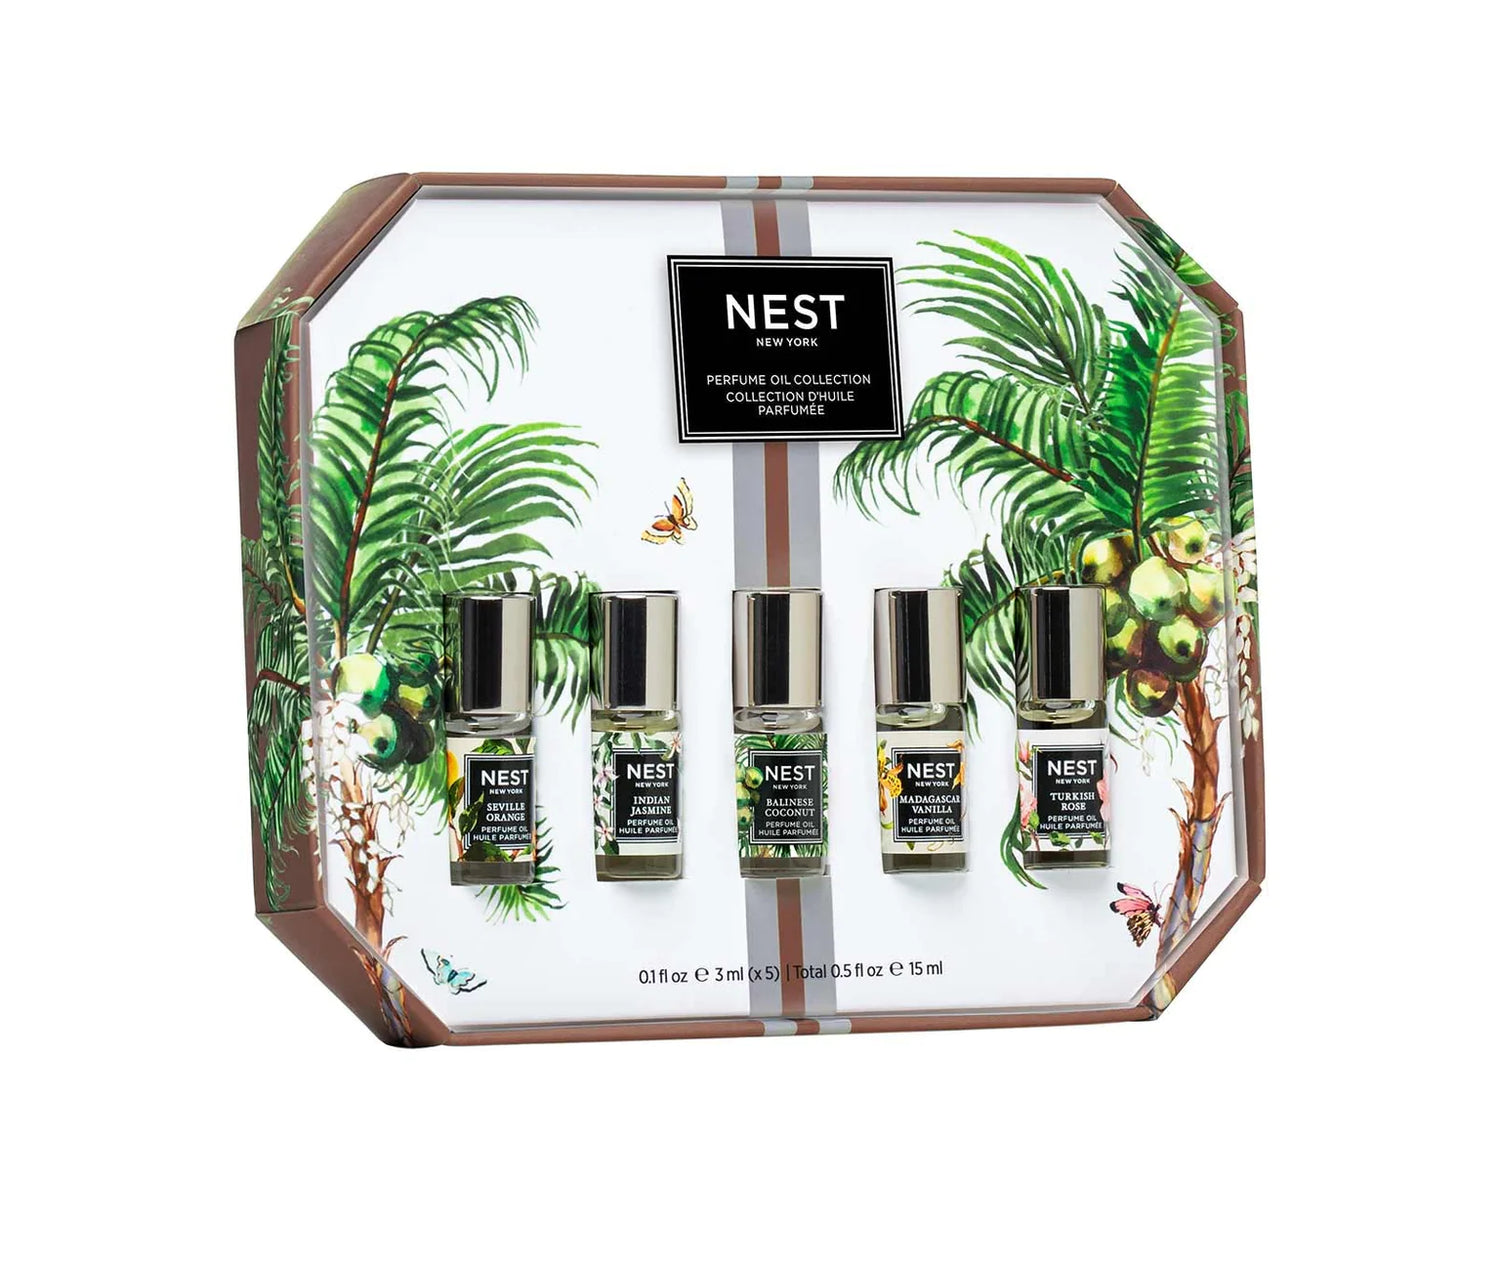 NEST Perfume Oil Discovery Set